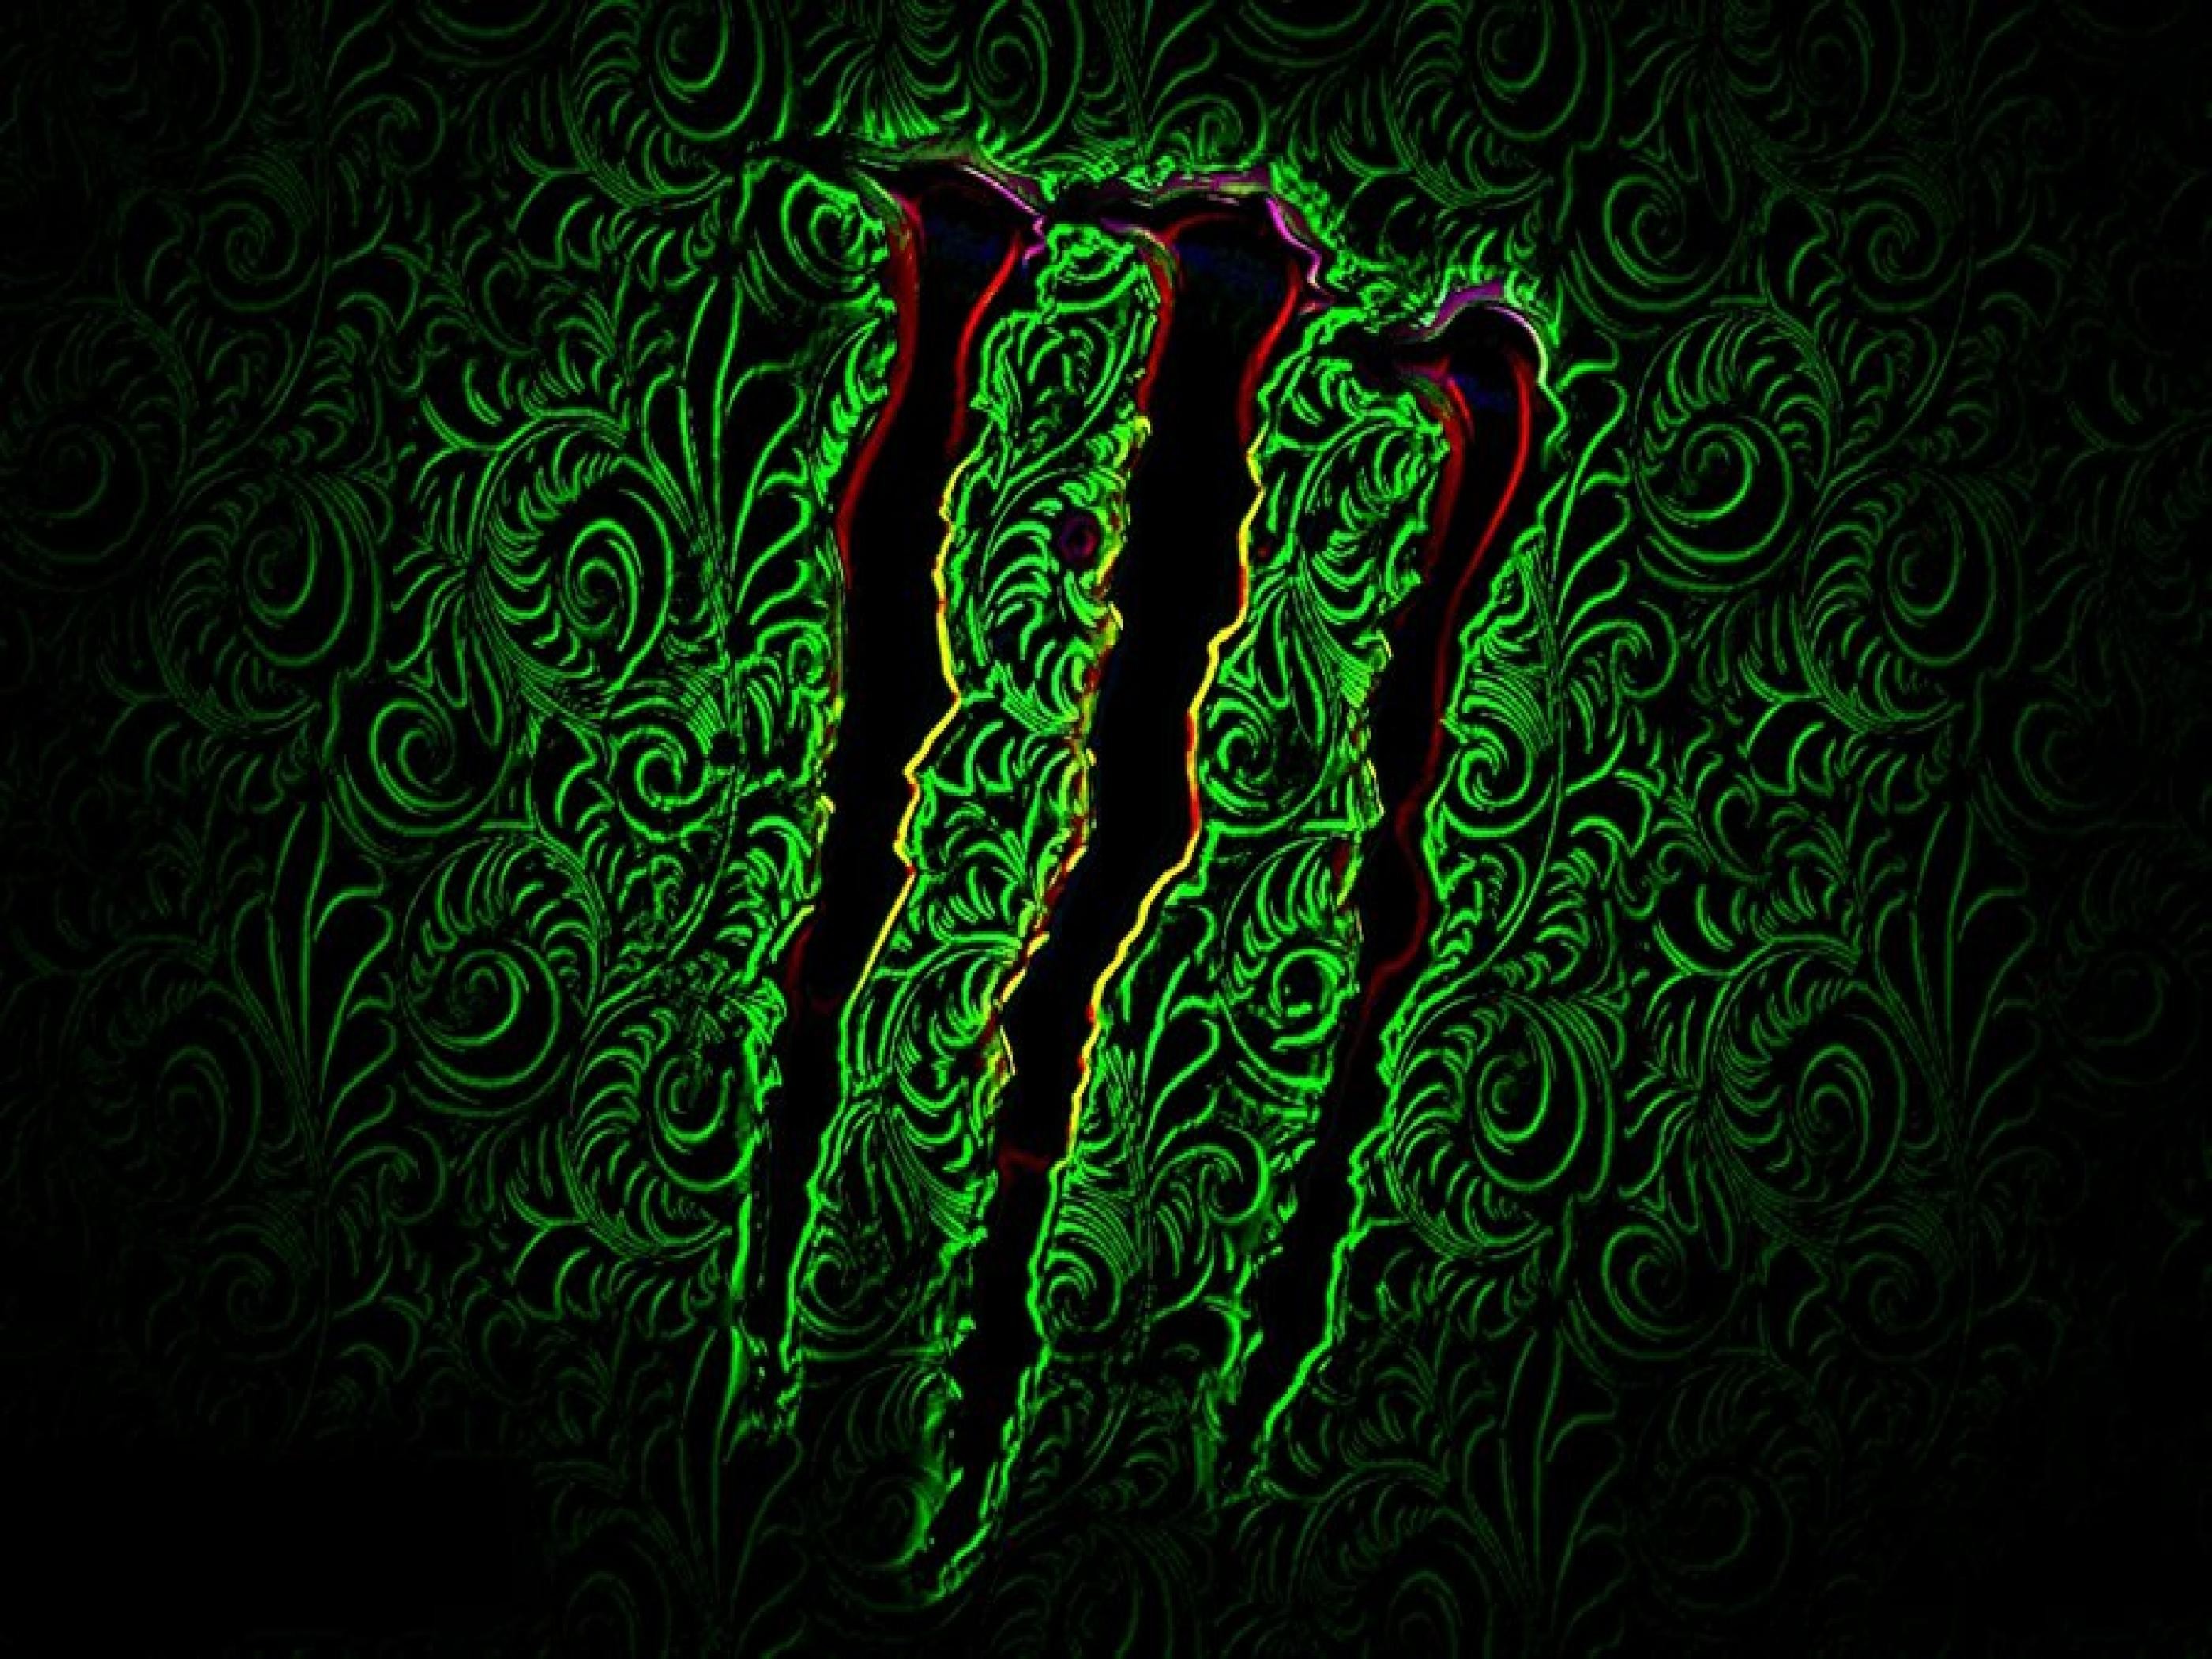 2800x2100 monster energy picture wallpapers hd desktop wallpapers 4k windows 10 mac  apple colourful images backgrounds download